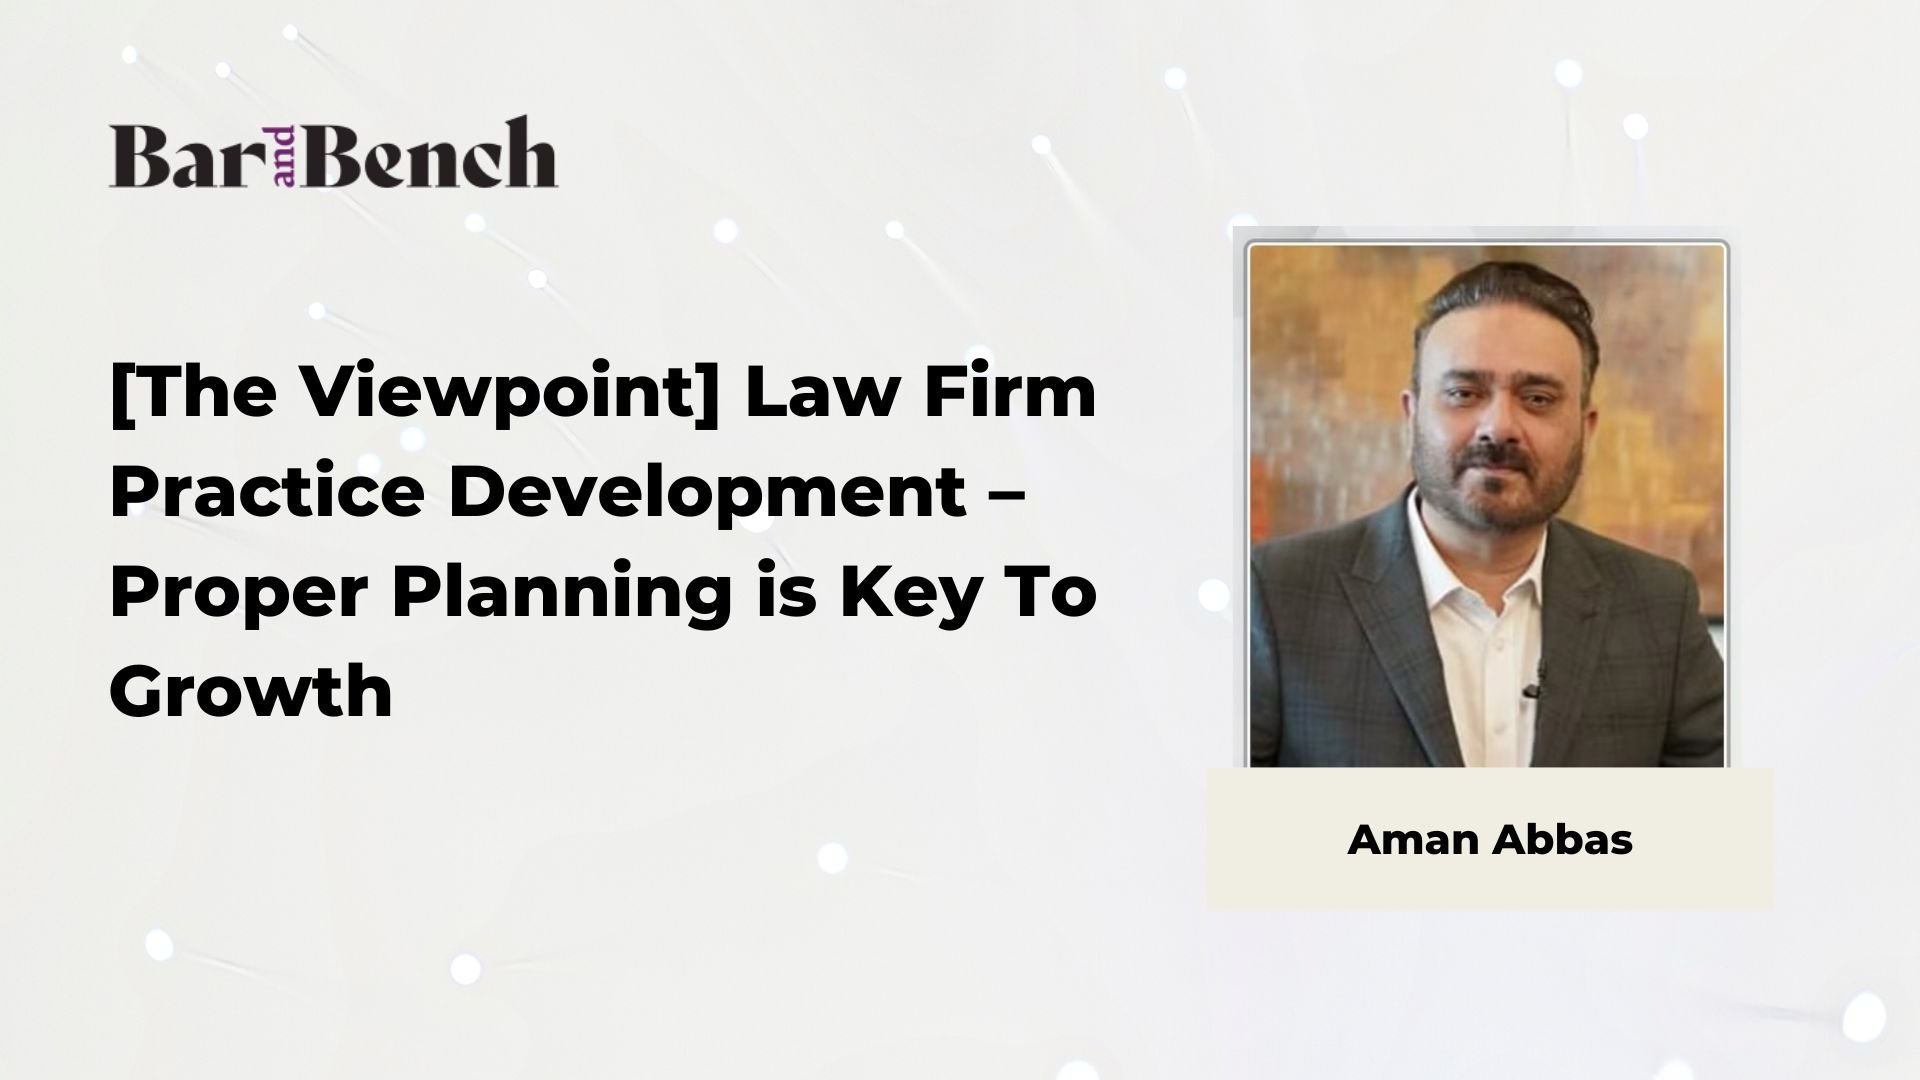 Law Firm Practice Development – Proper Planning is Key To Growth